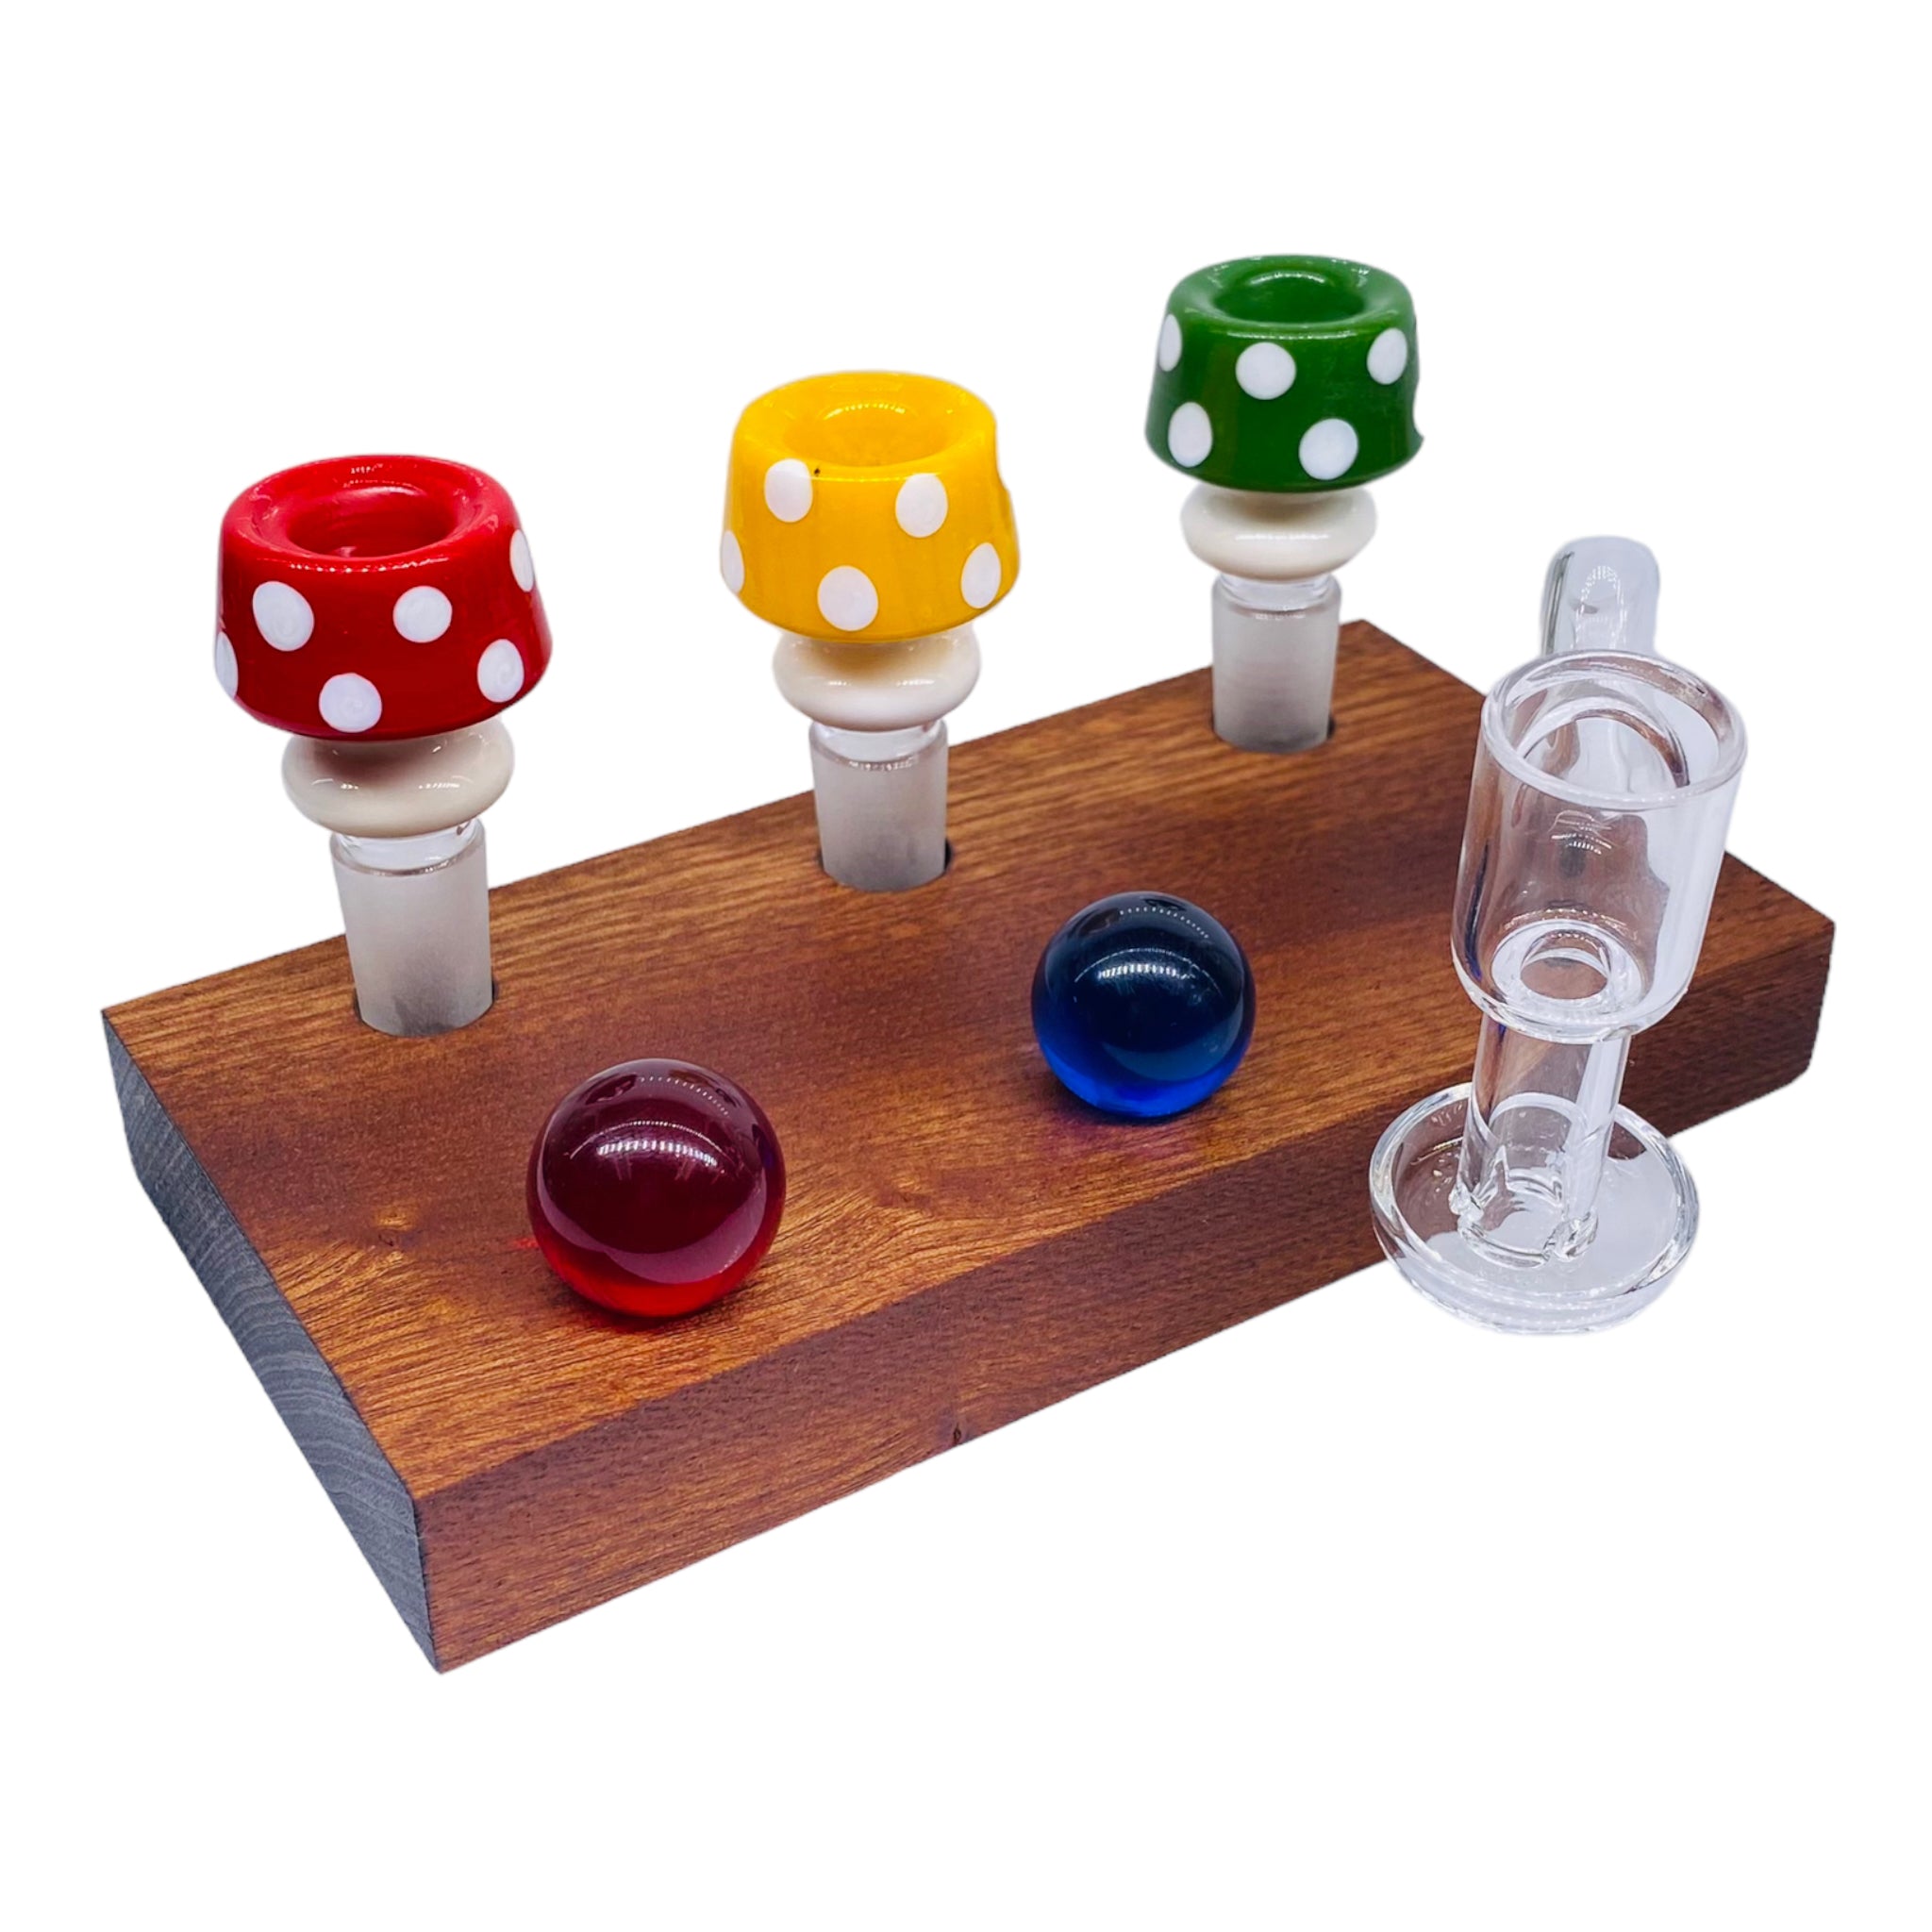 6 Hole Wood Display Stand Holder For 14mm Bong Bowl Pieces Or Quartz Bangers - Mahogany